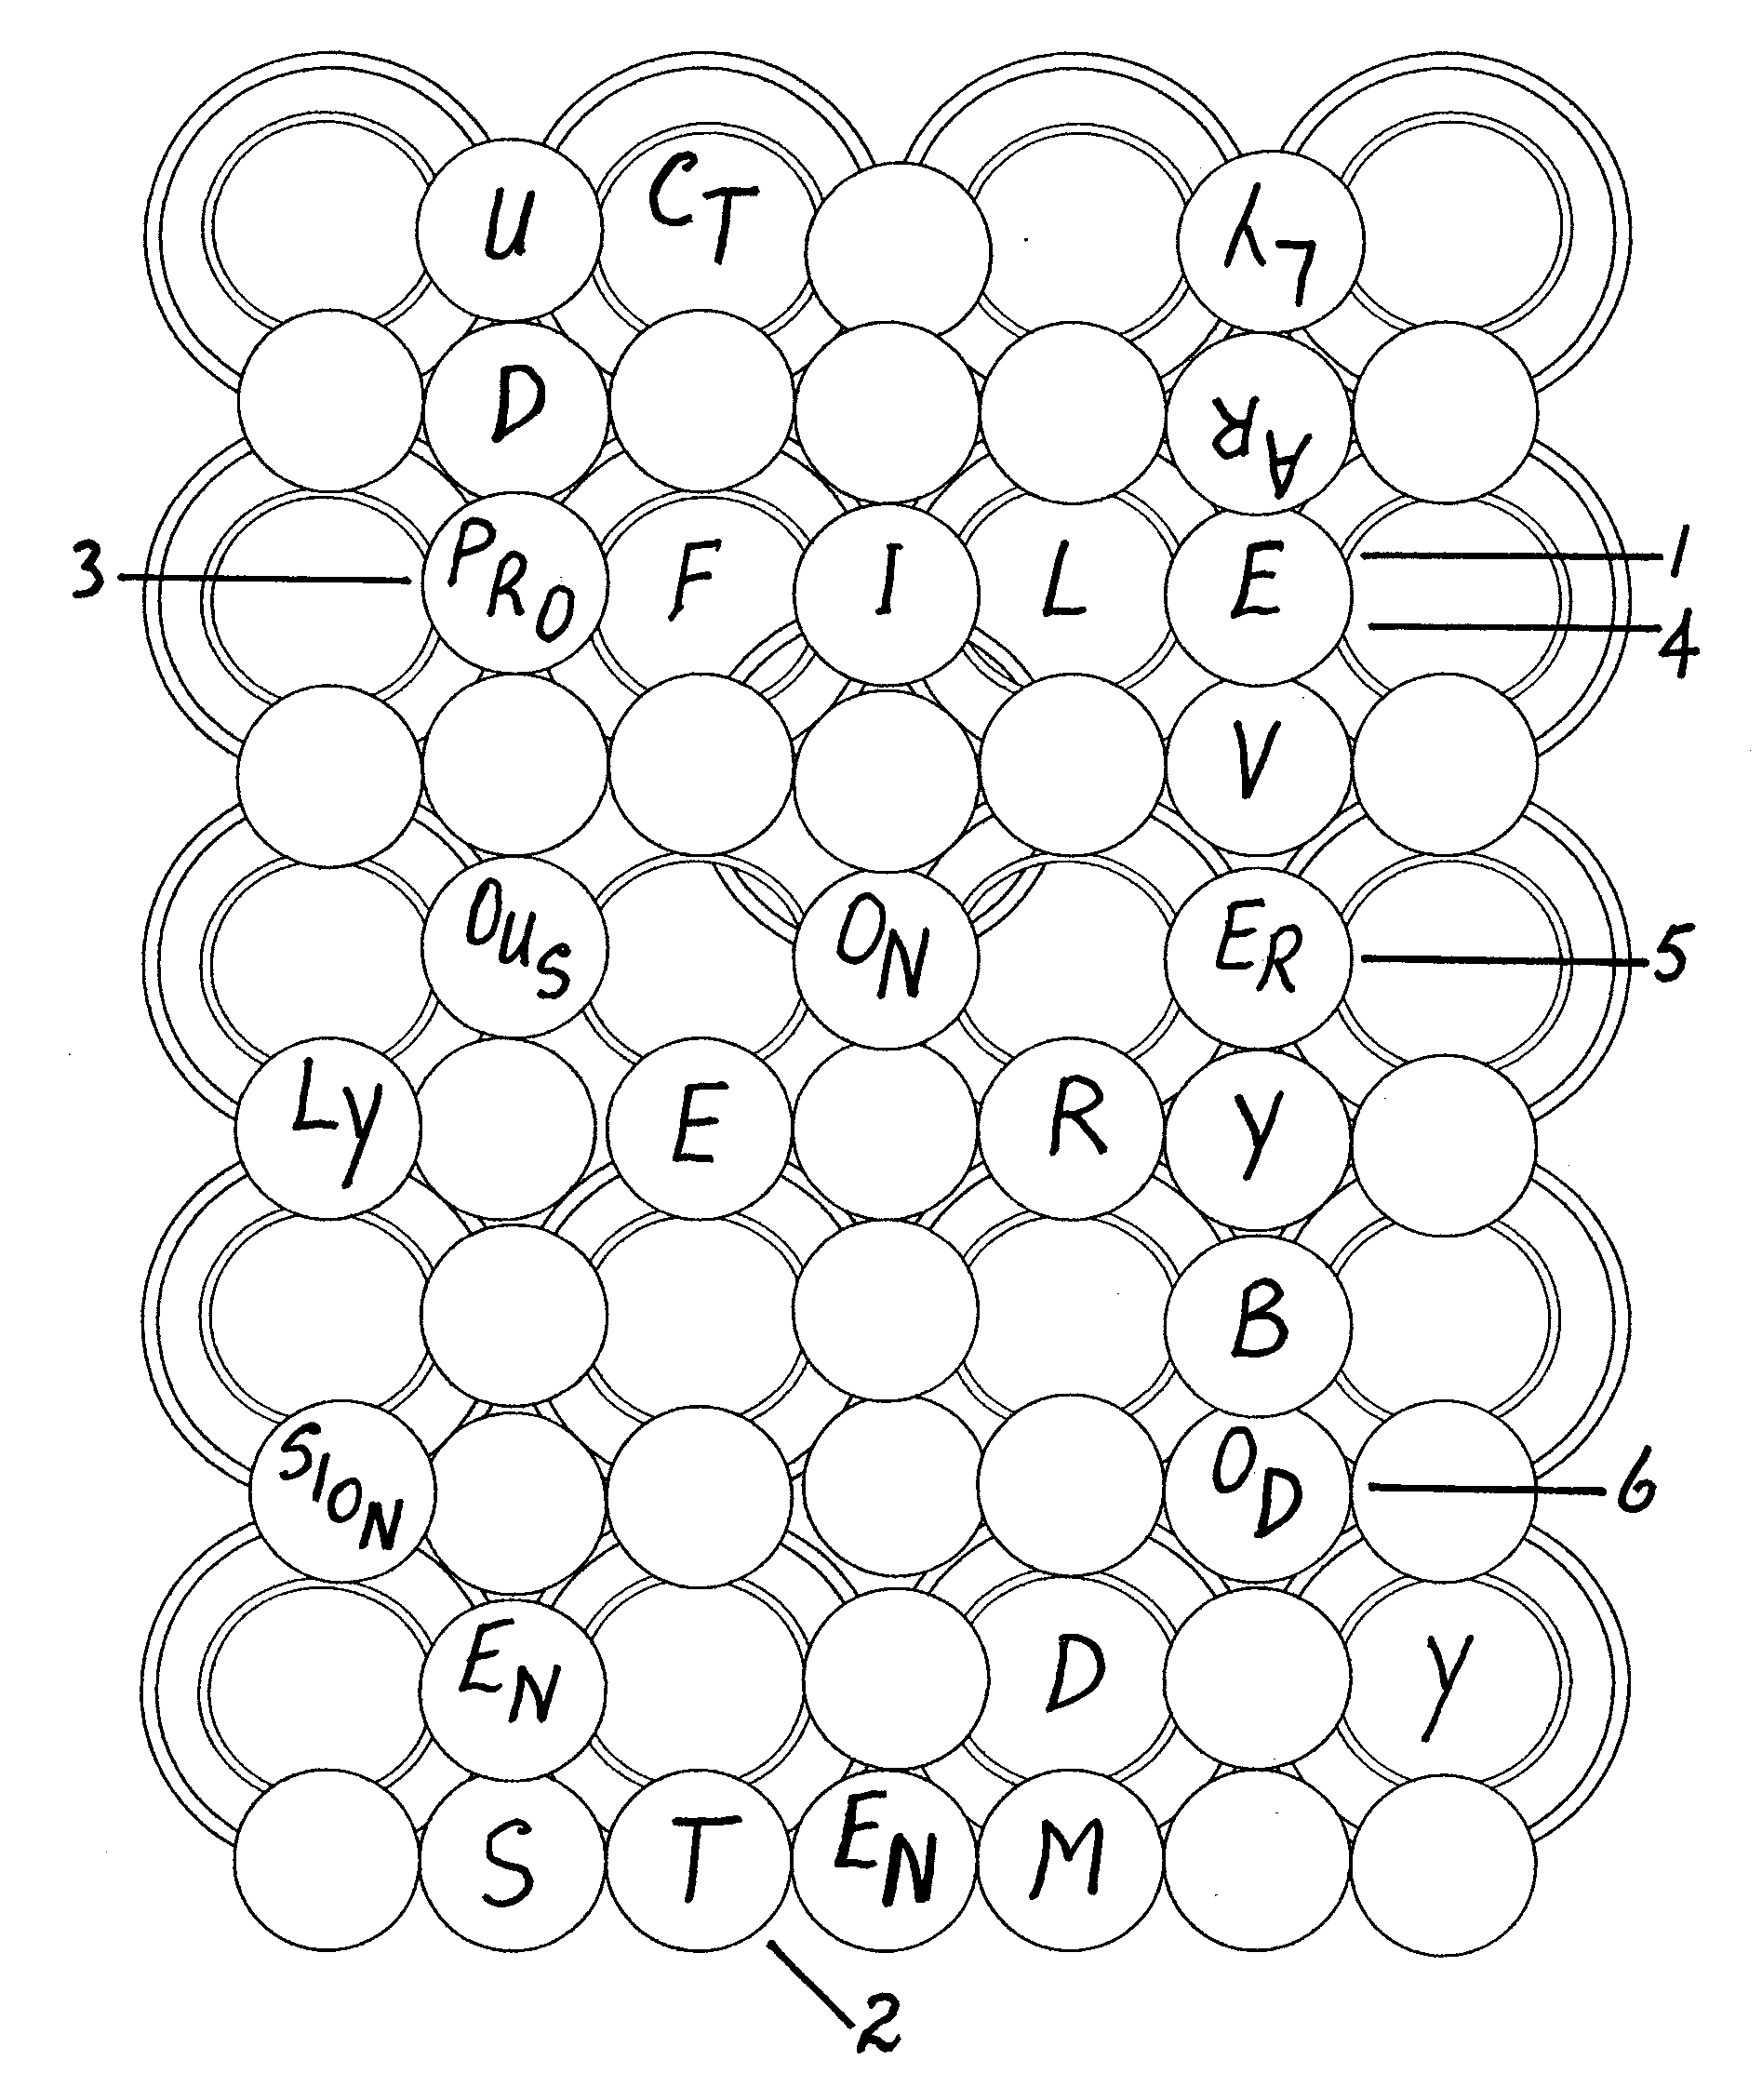 Board game for building words with single-letter and multiple-letter tiles on a plurality of multi-directional pathways